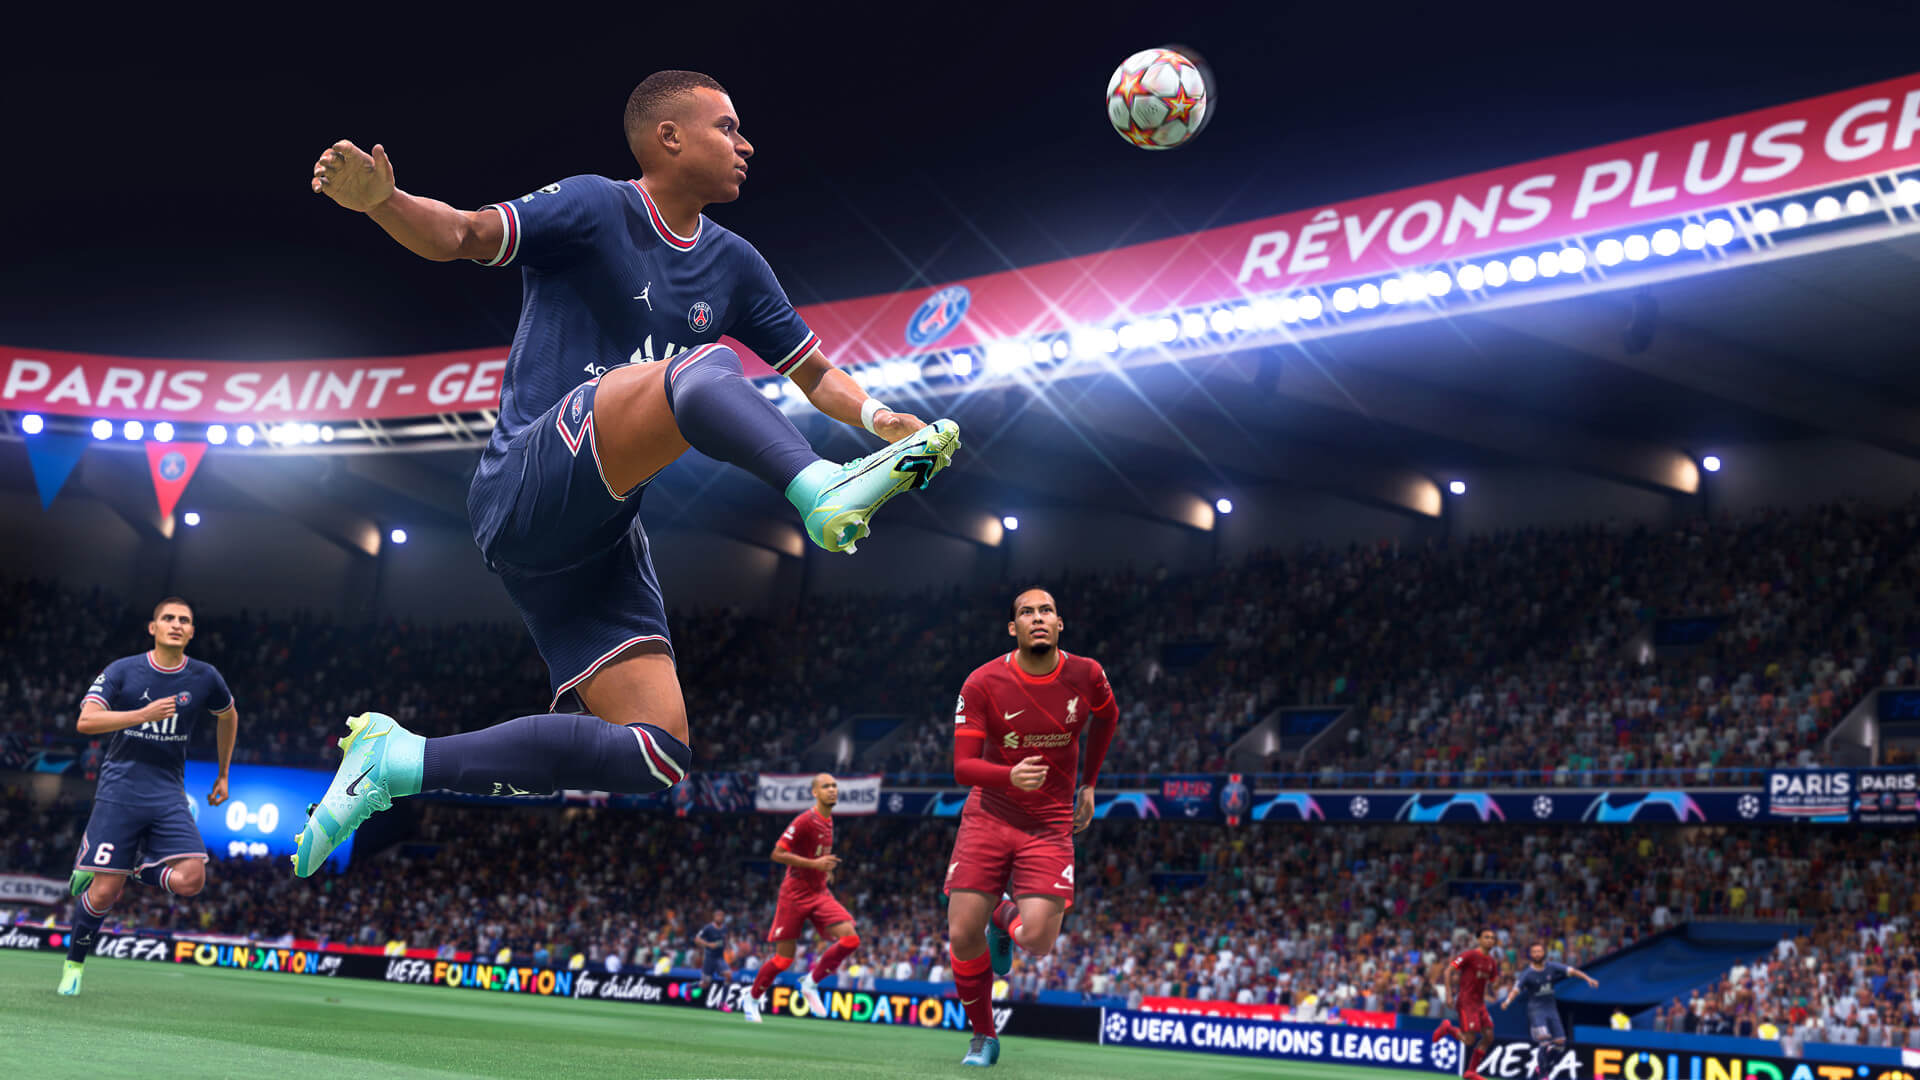 FIFA 22, an EA-produced game, a studio that the SOC also competed against